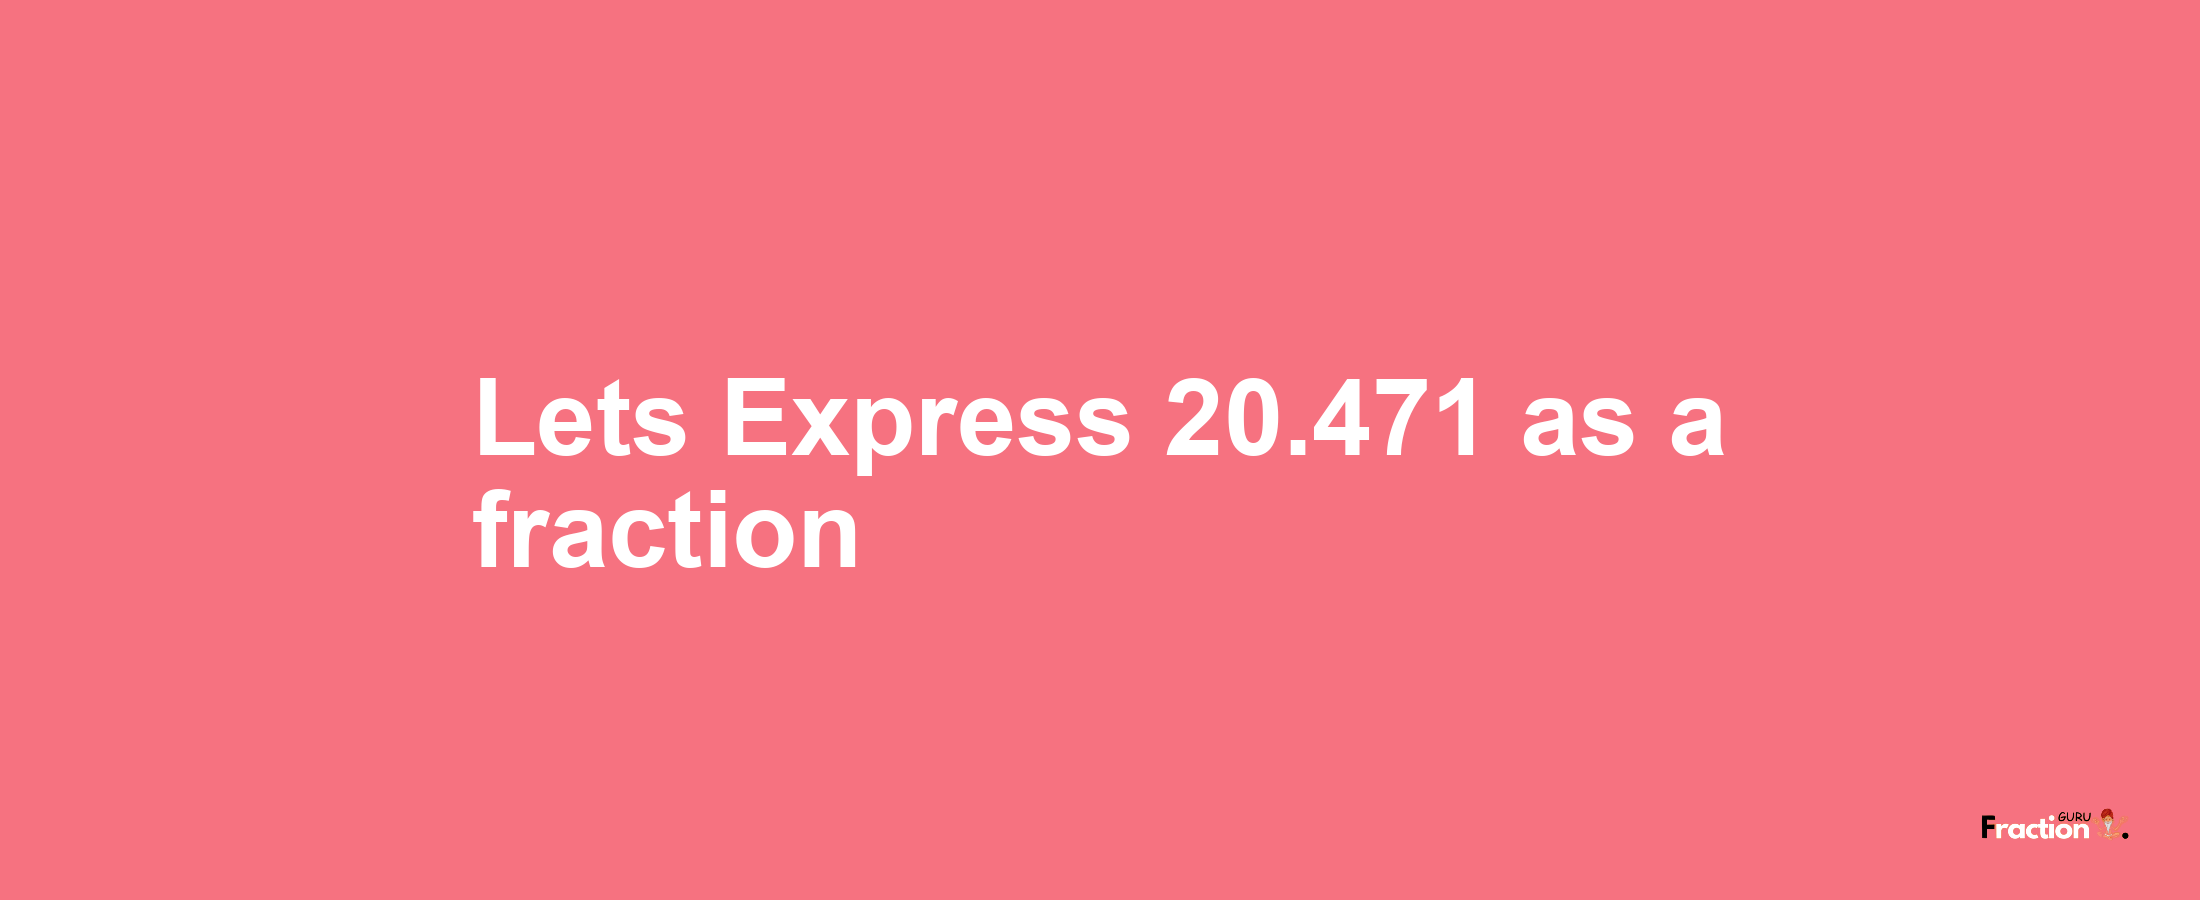 Lets Express 20.471 as afraction